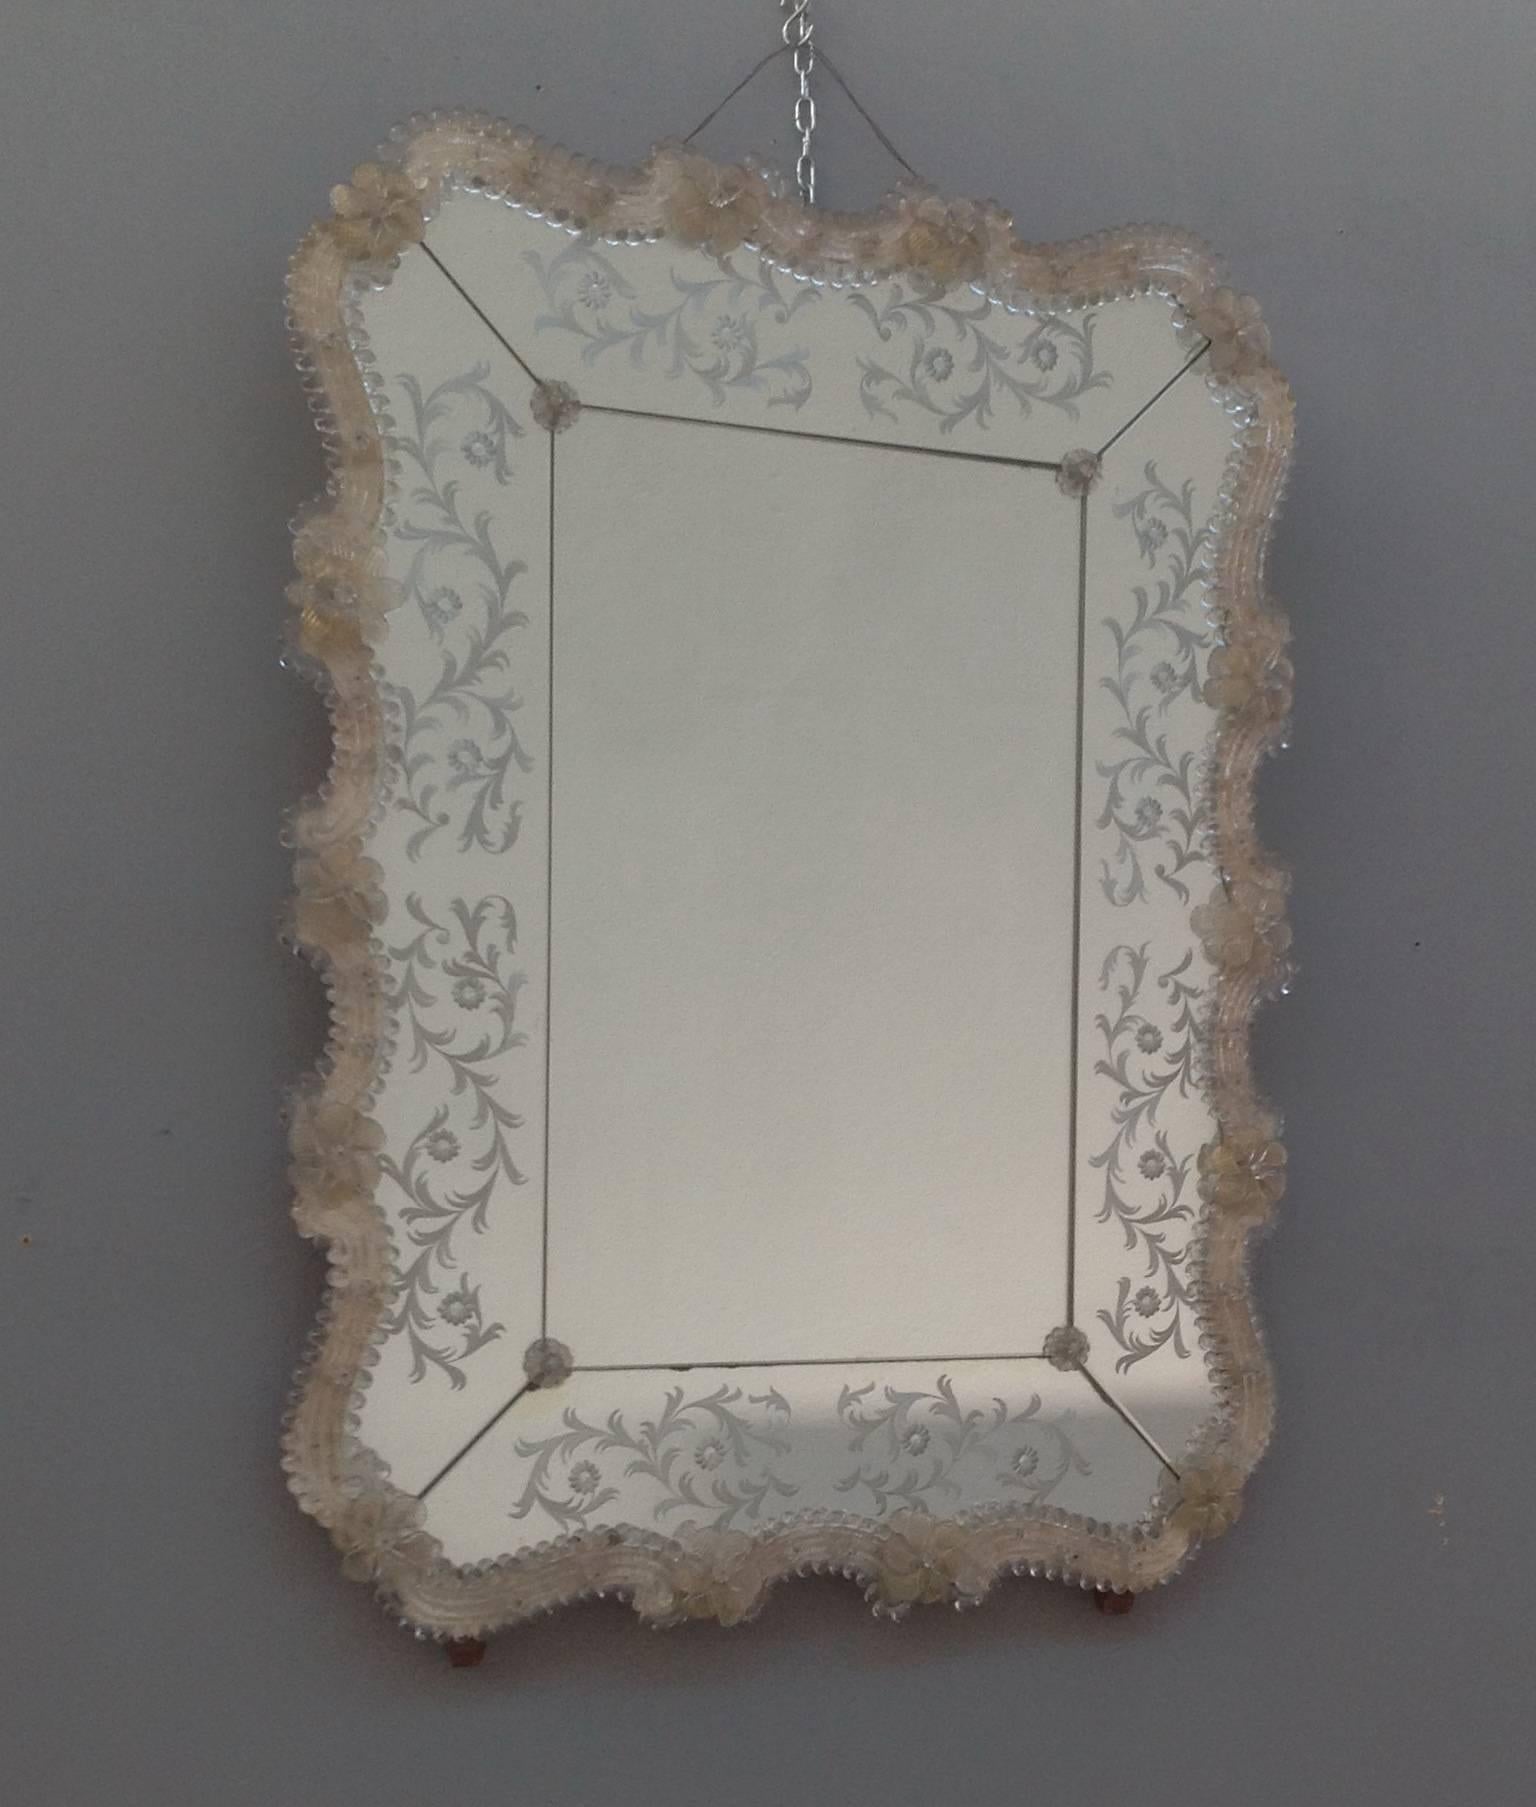 Lovely Murano glass mirror with floral accents and etching.
Perfect ondulated frame in clear glass with gold inclusions and accented by glass flowers.